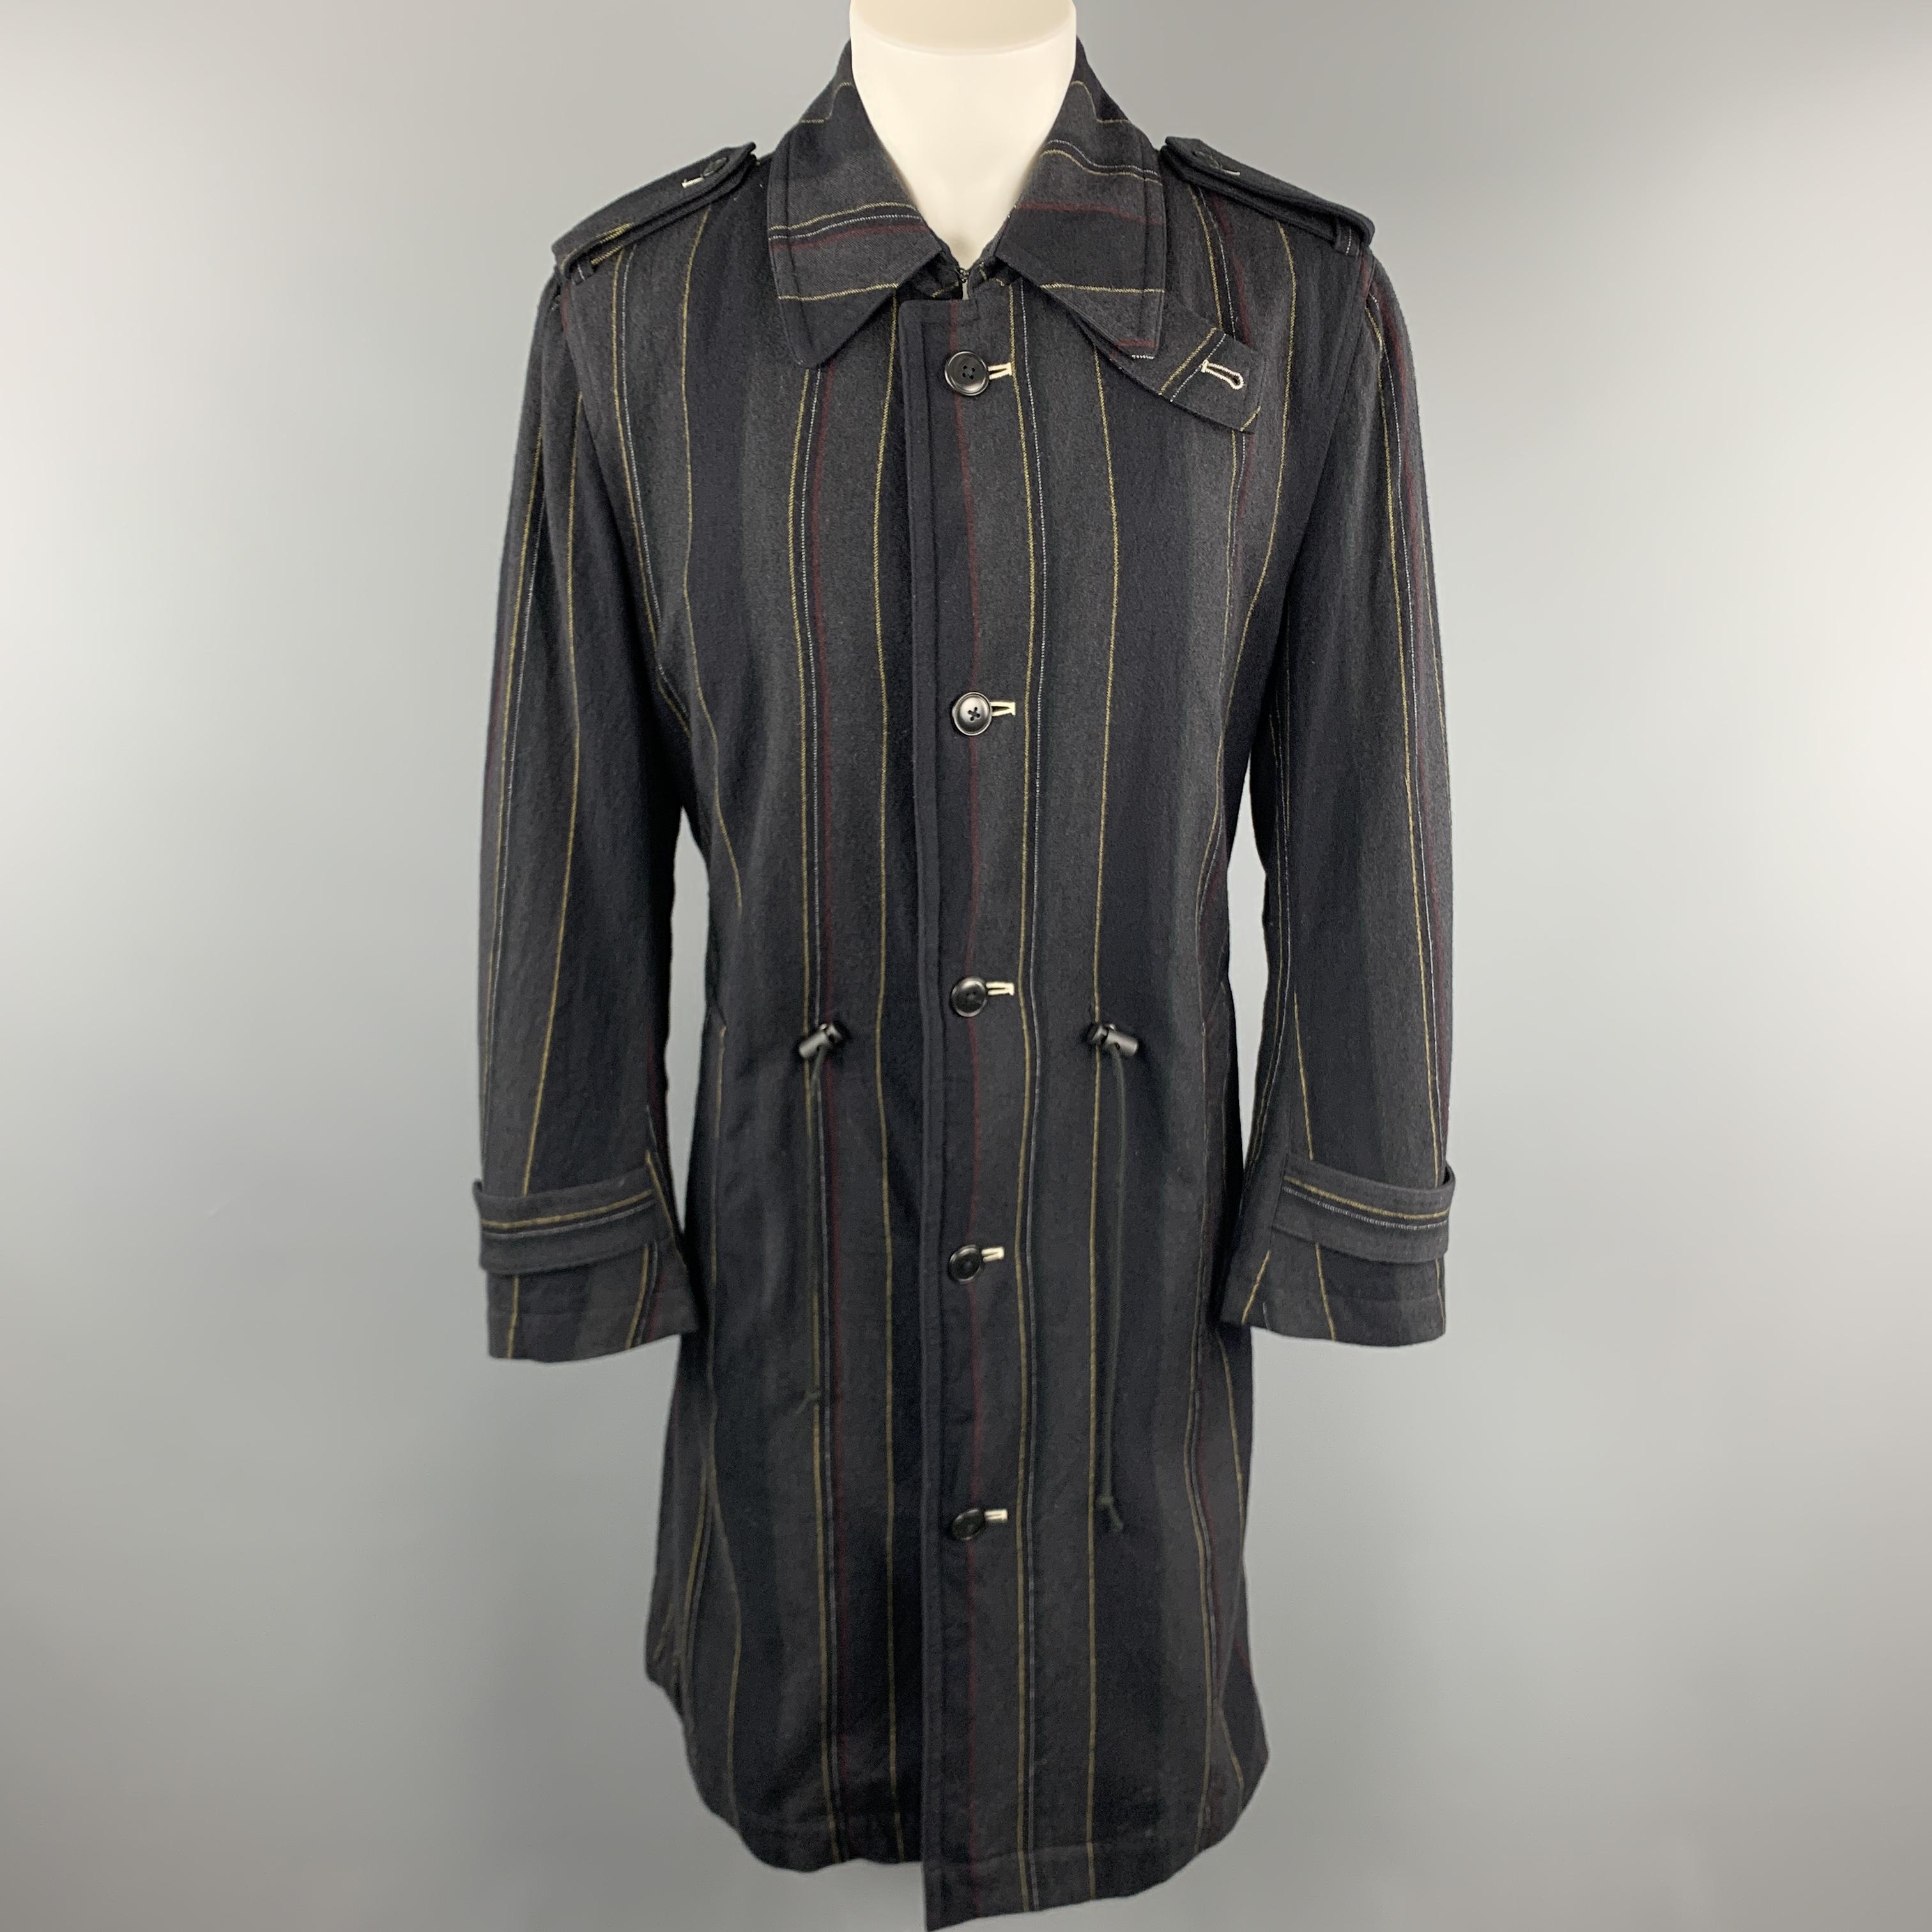 Y'S by YOHJI YAMAMOTO trench coat comes in charcoal striped wool with an oversized collar, epaulets, single breasted button front, drawstring waist, and belt. 

Excellent Pre-Owned Condition.
Marked: JP 3

Measurements:

Shoulder: 17 in.
Chest: 46